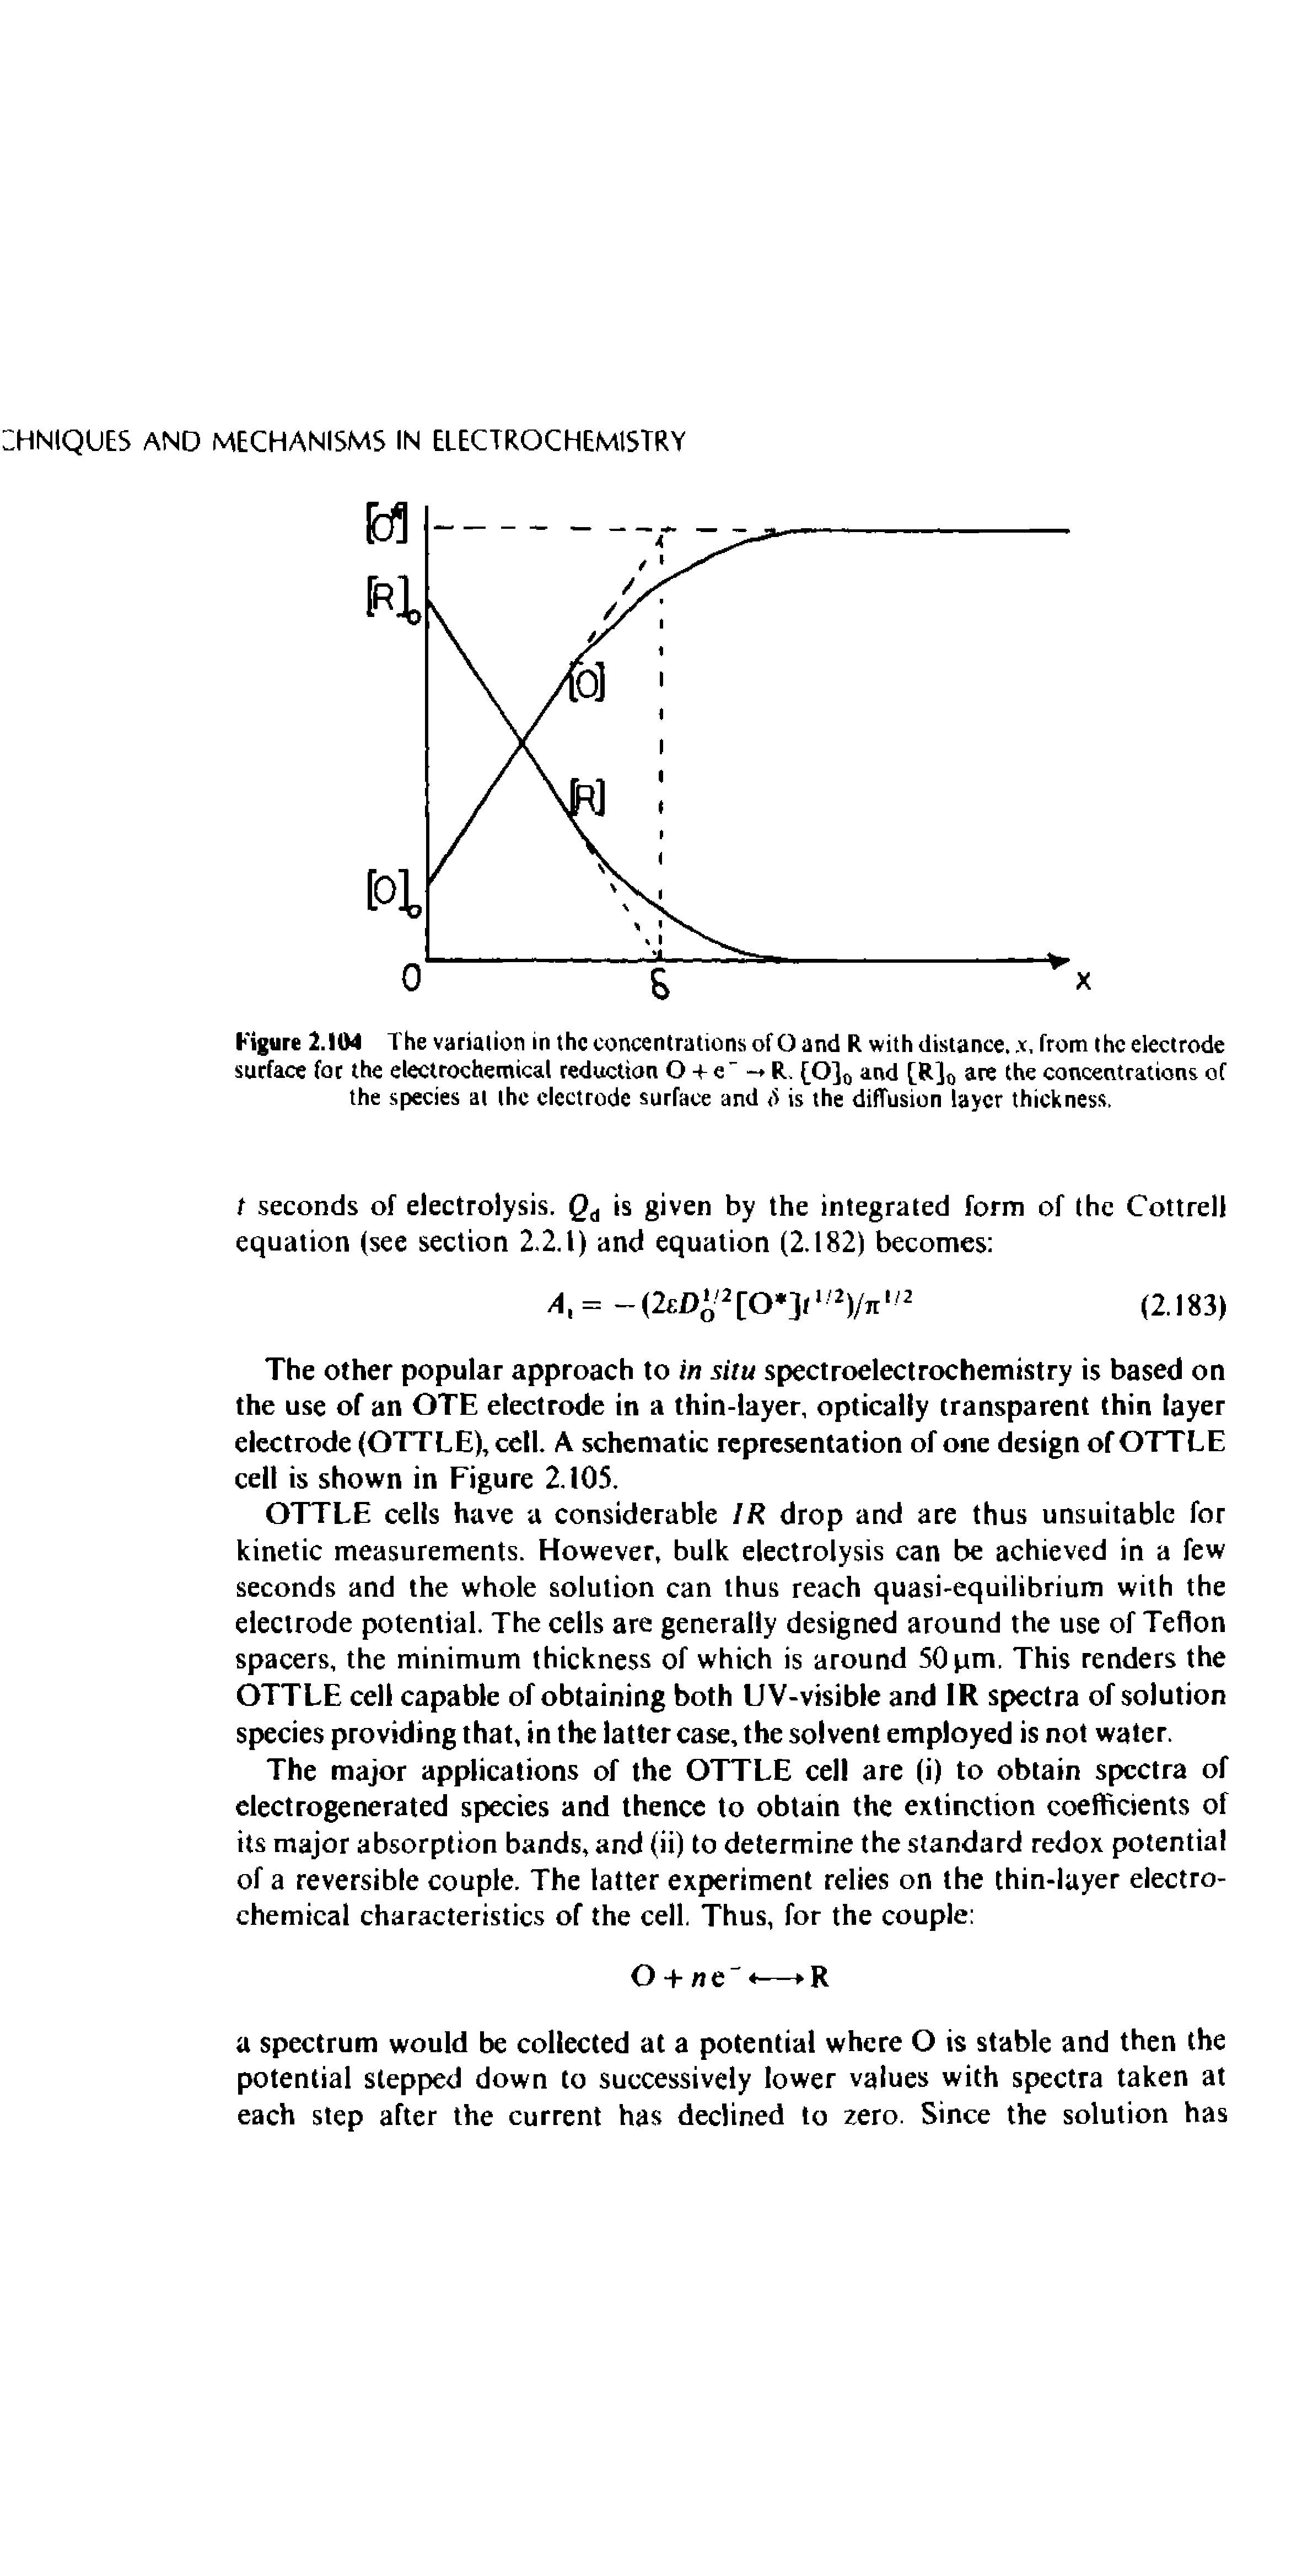 Figure 2.IW The variation in the concentrations of O and R with distance, x, from the electrode surface for the electrochemical reduction O + e " -+ R, EO]0 and [RJt) are the concentrations of the species at the electrode surface and is the diffusion layer thickness.